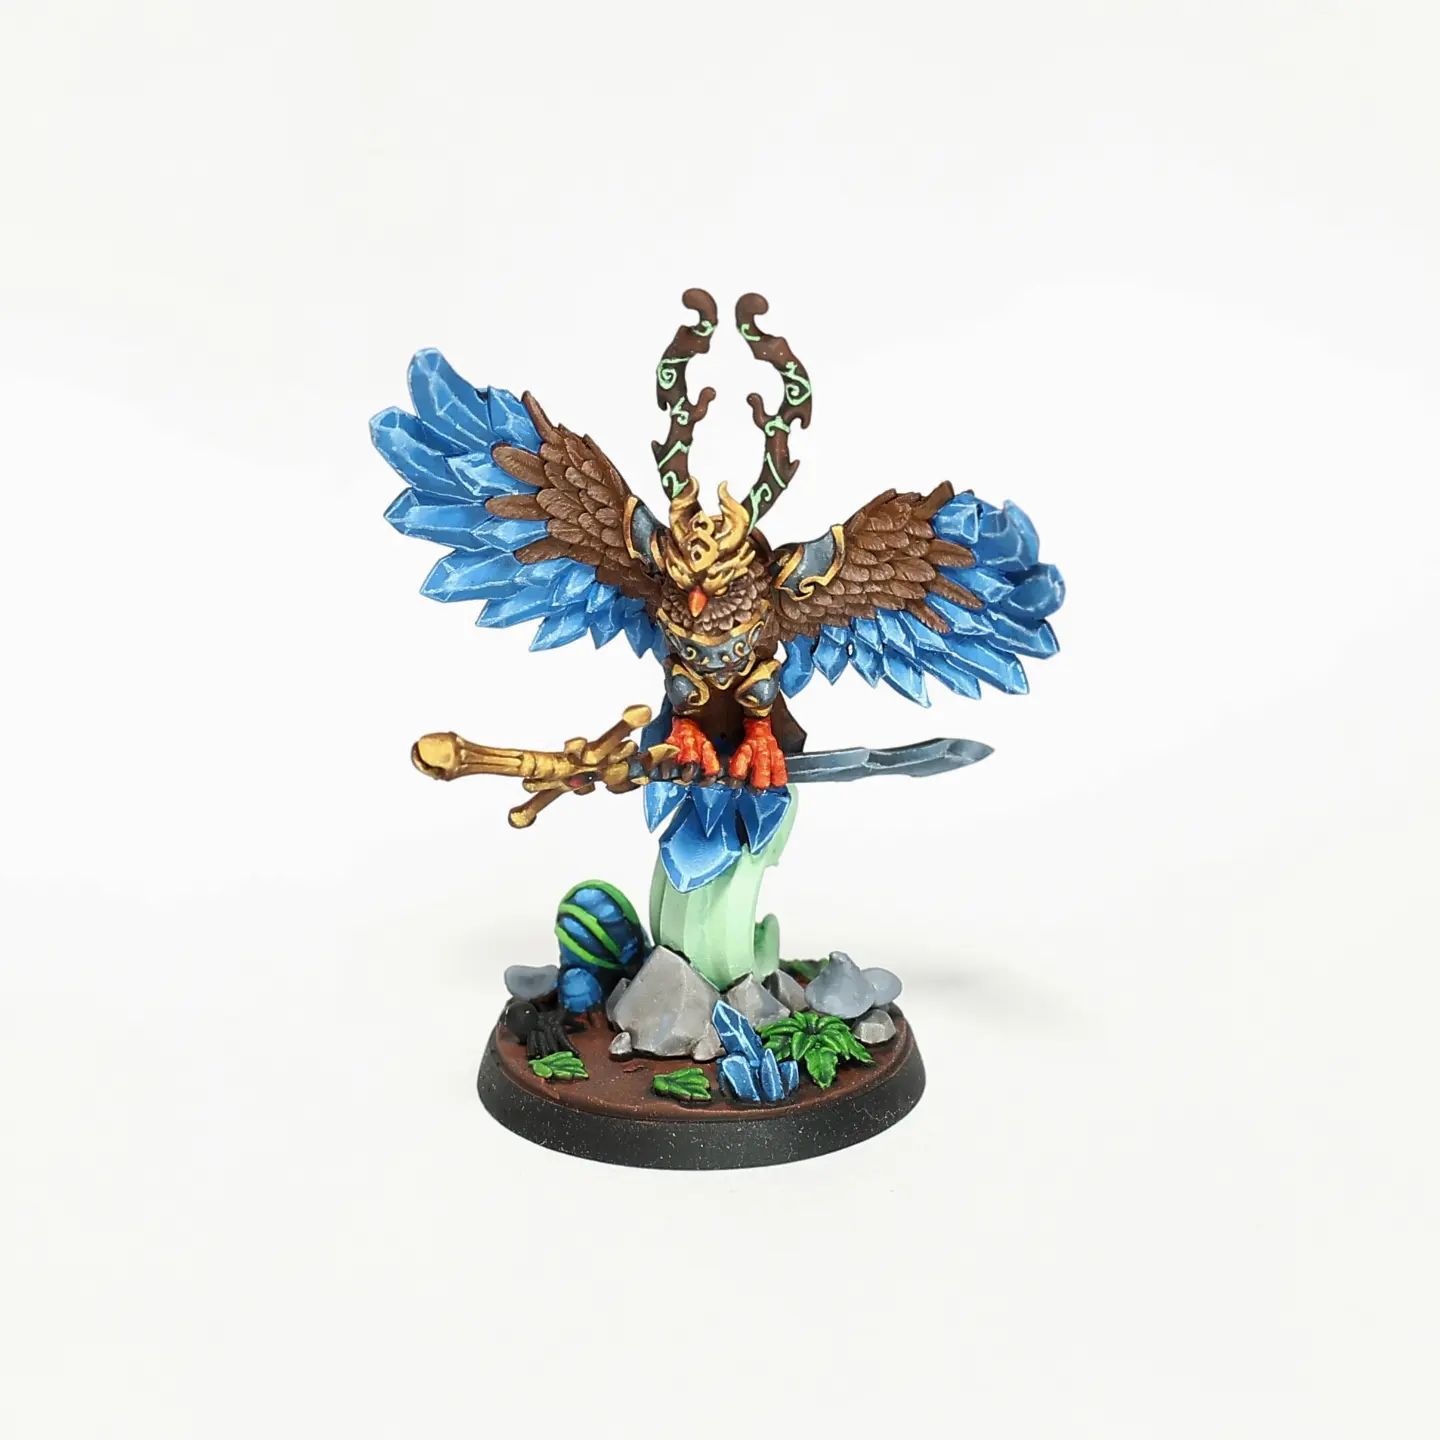 Egil the Wings of Winter by Signum #owl #dnd #dndminiatures #legendsofsignum #rpg #miniatures #mini #miniature #miniaturepainting #vallejho #signum #signumgames #sword #magic #blue #crystal #Wings #roleplayinggame